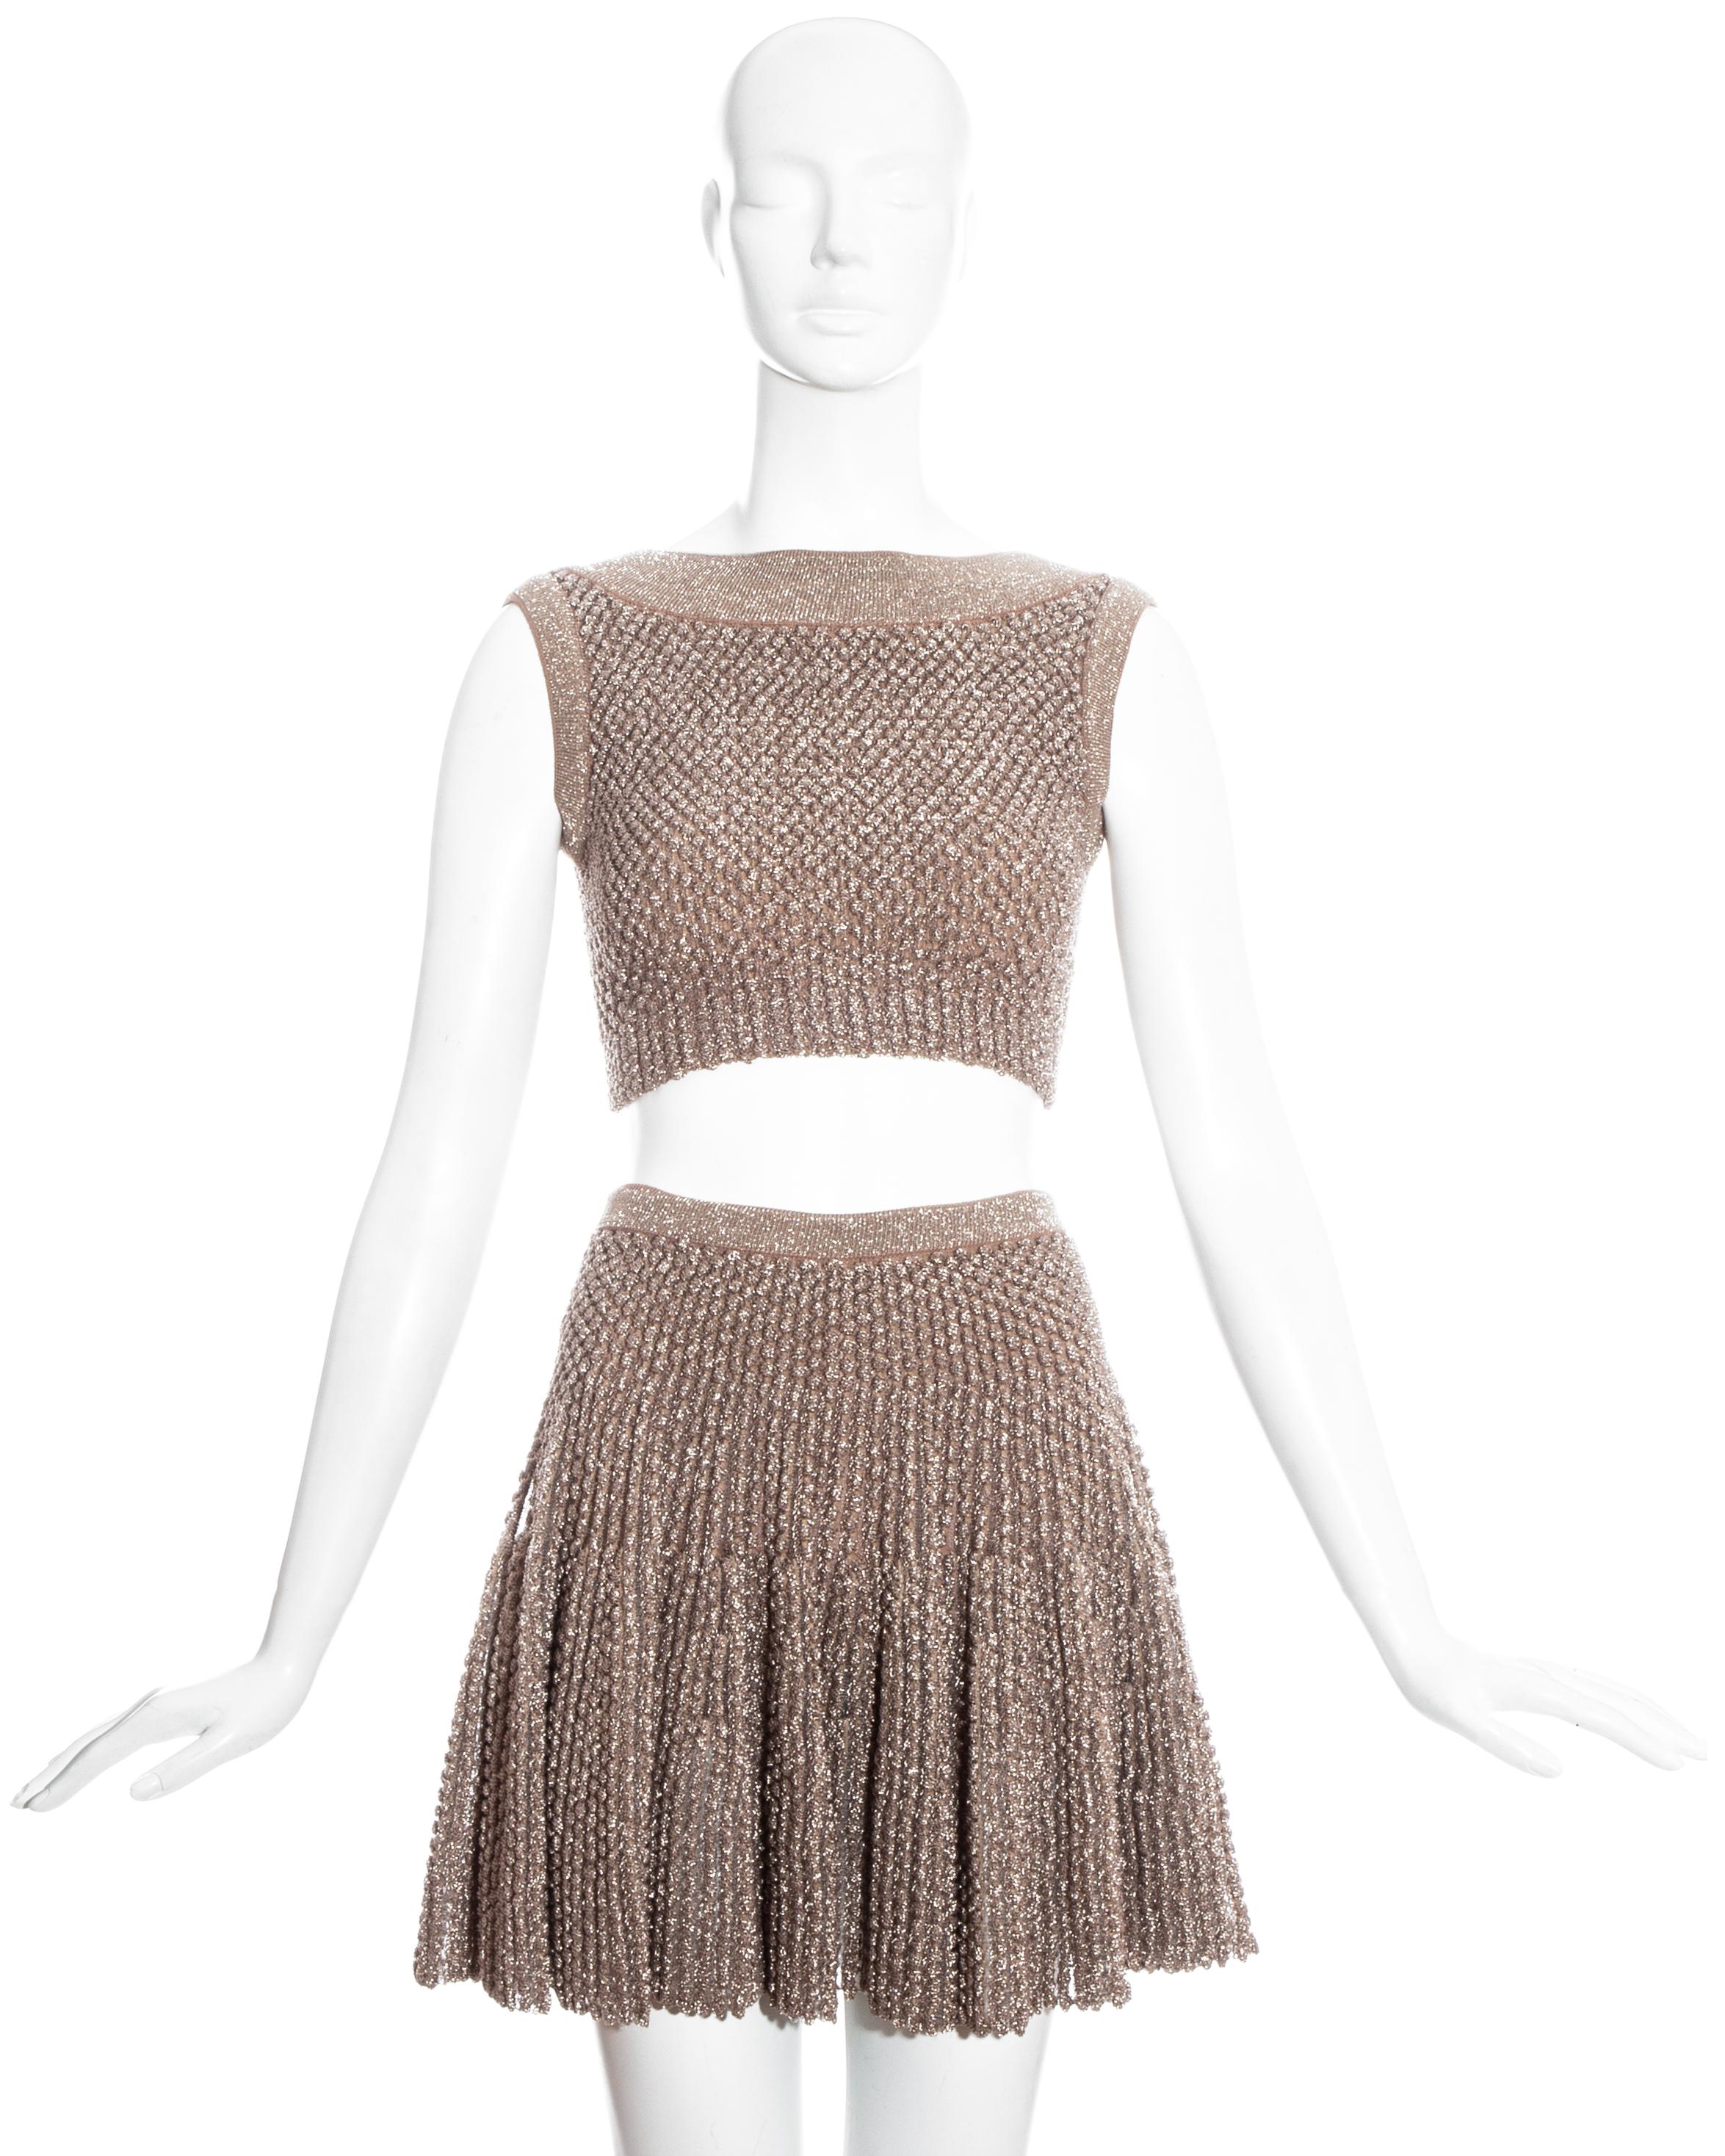 Azzedine Alaia metallic knitted crop top and skater skirt with built-in mini shorts.

Spring-Summer 2015

Measurements:

Top (will stretch)
Shoulder to shoulder 14”
Waist 21”
Bust 27”
Total length 13”

Skirt (will stretch)
Waist 22”
Hips 28”
Total